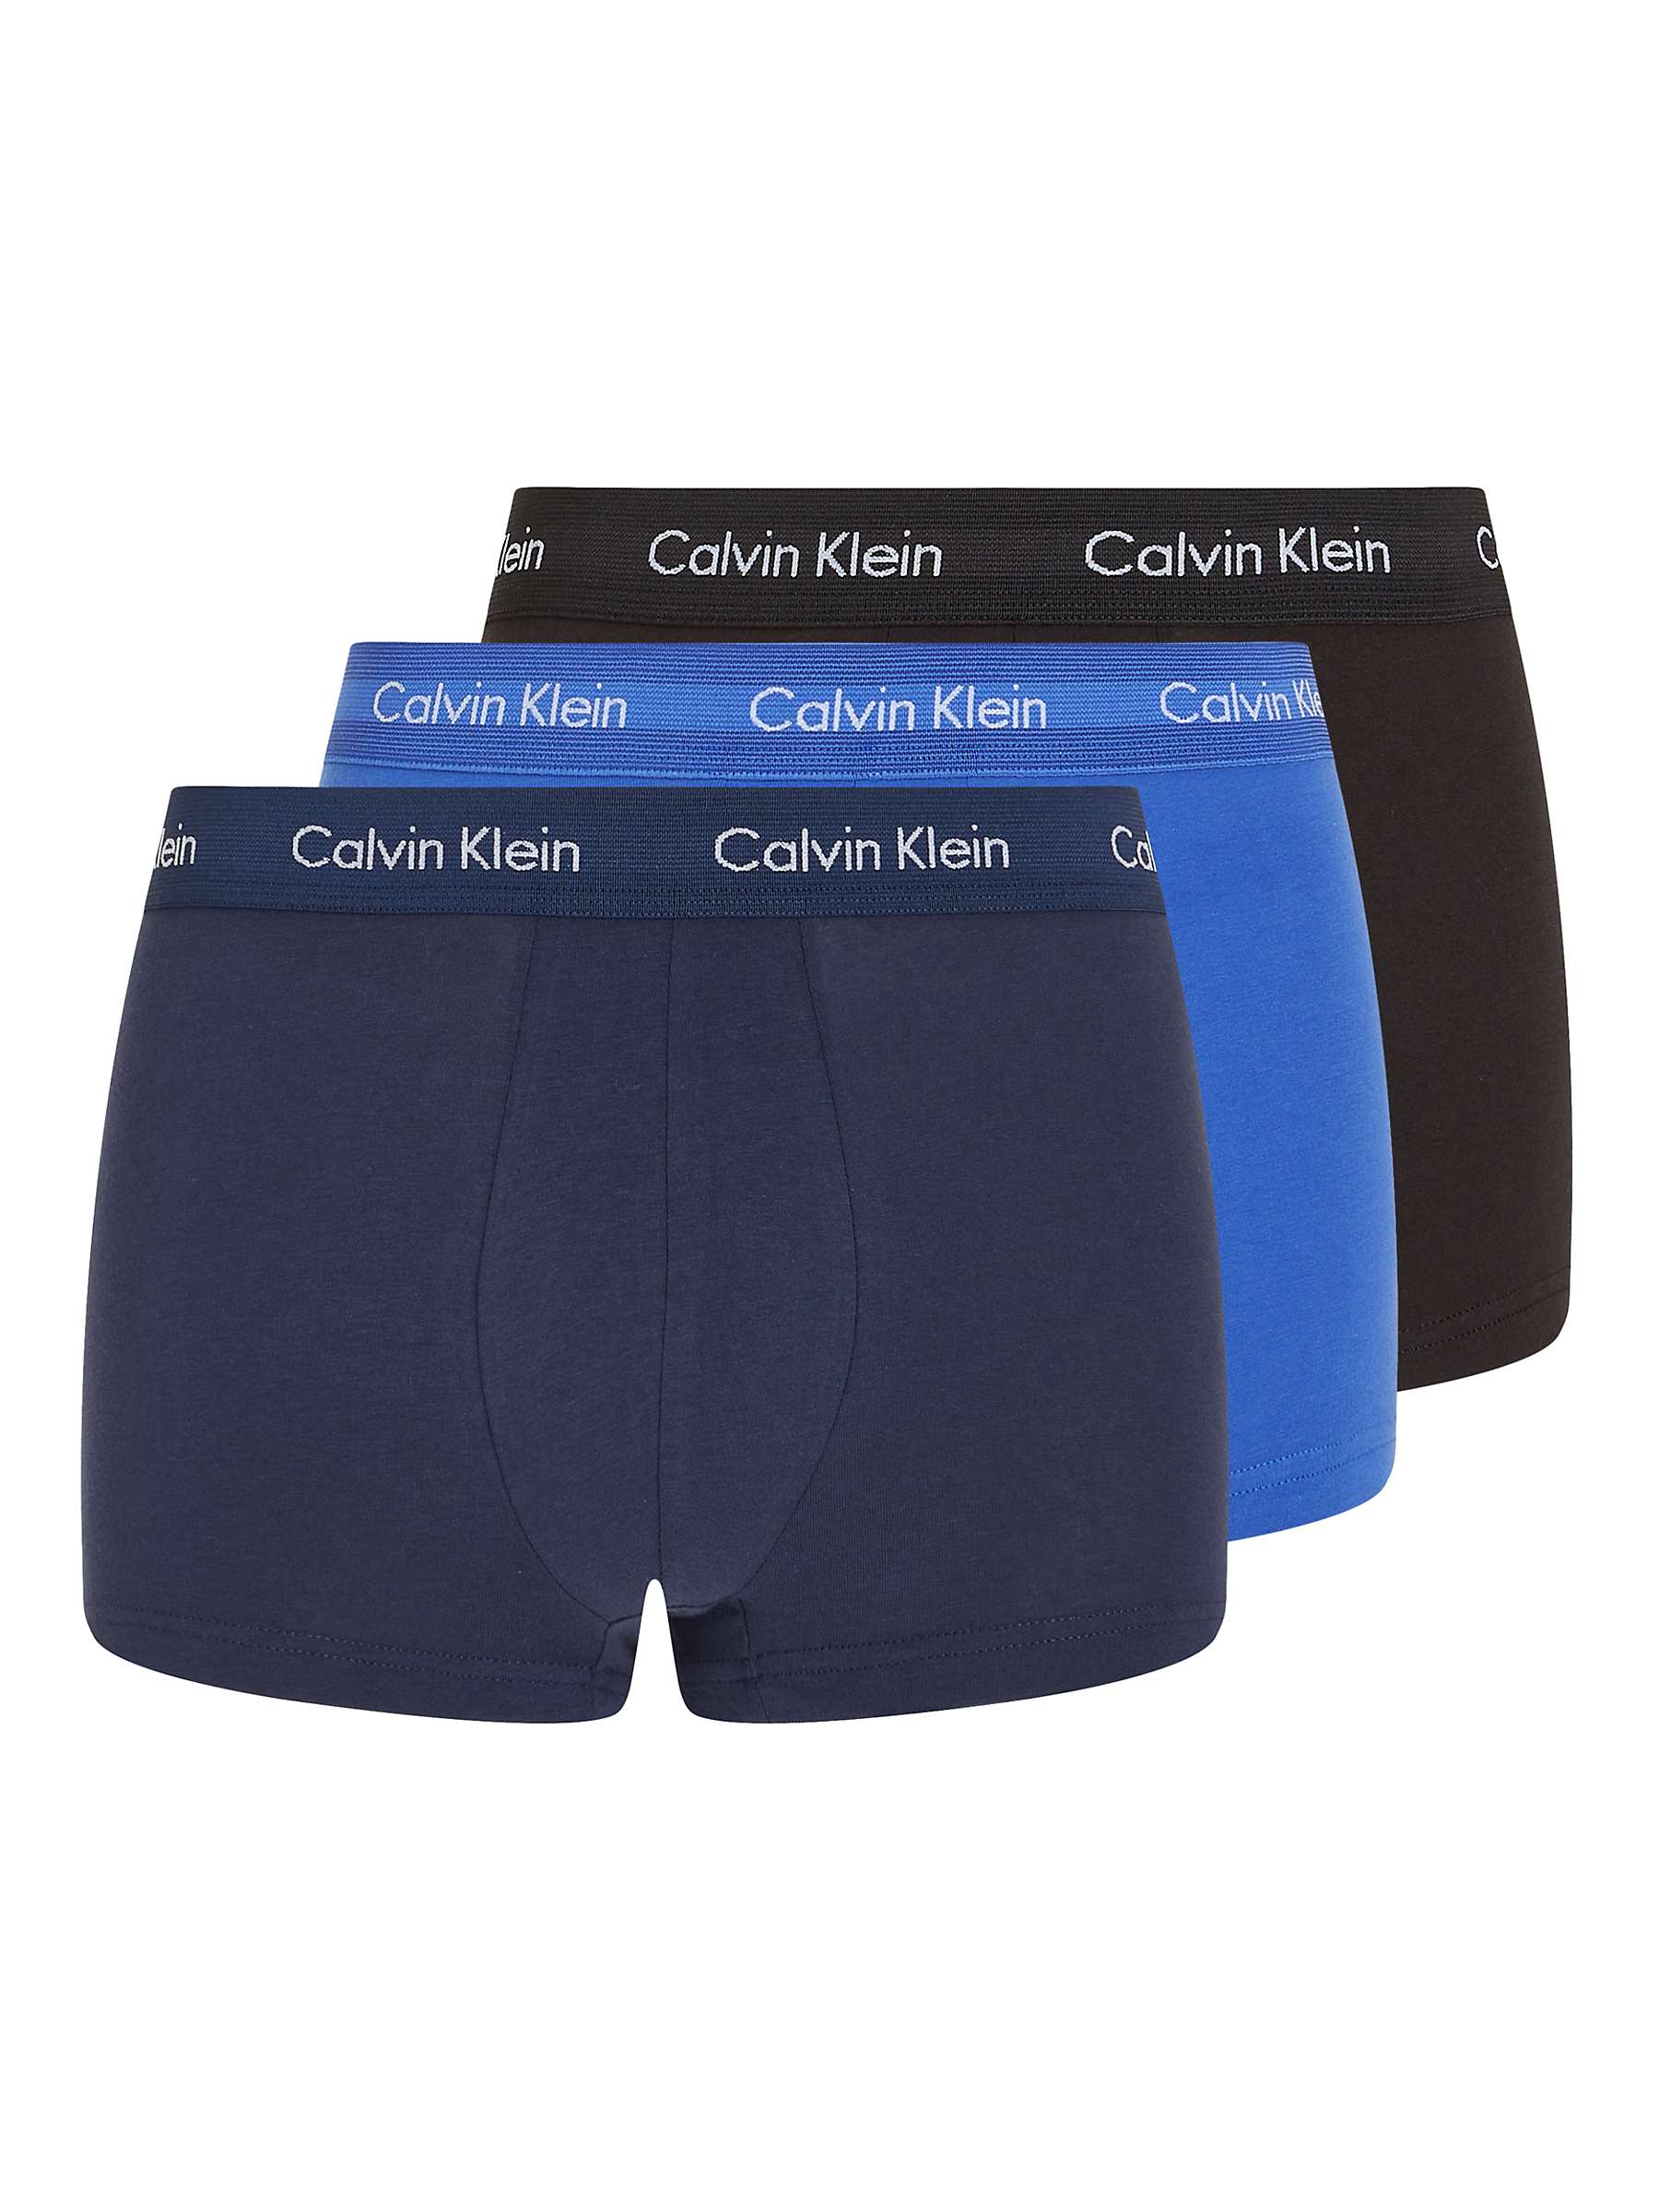 Buy Calvin Klein Low Rise Cotton Stretch Trunks, Pack of 3 Online at johnlewis.com